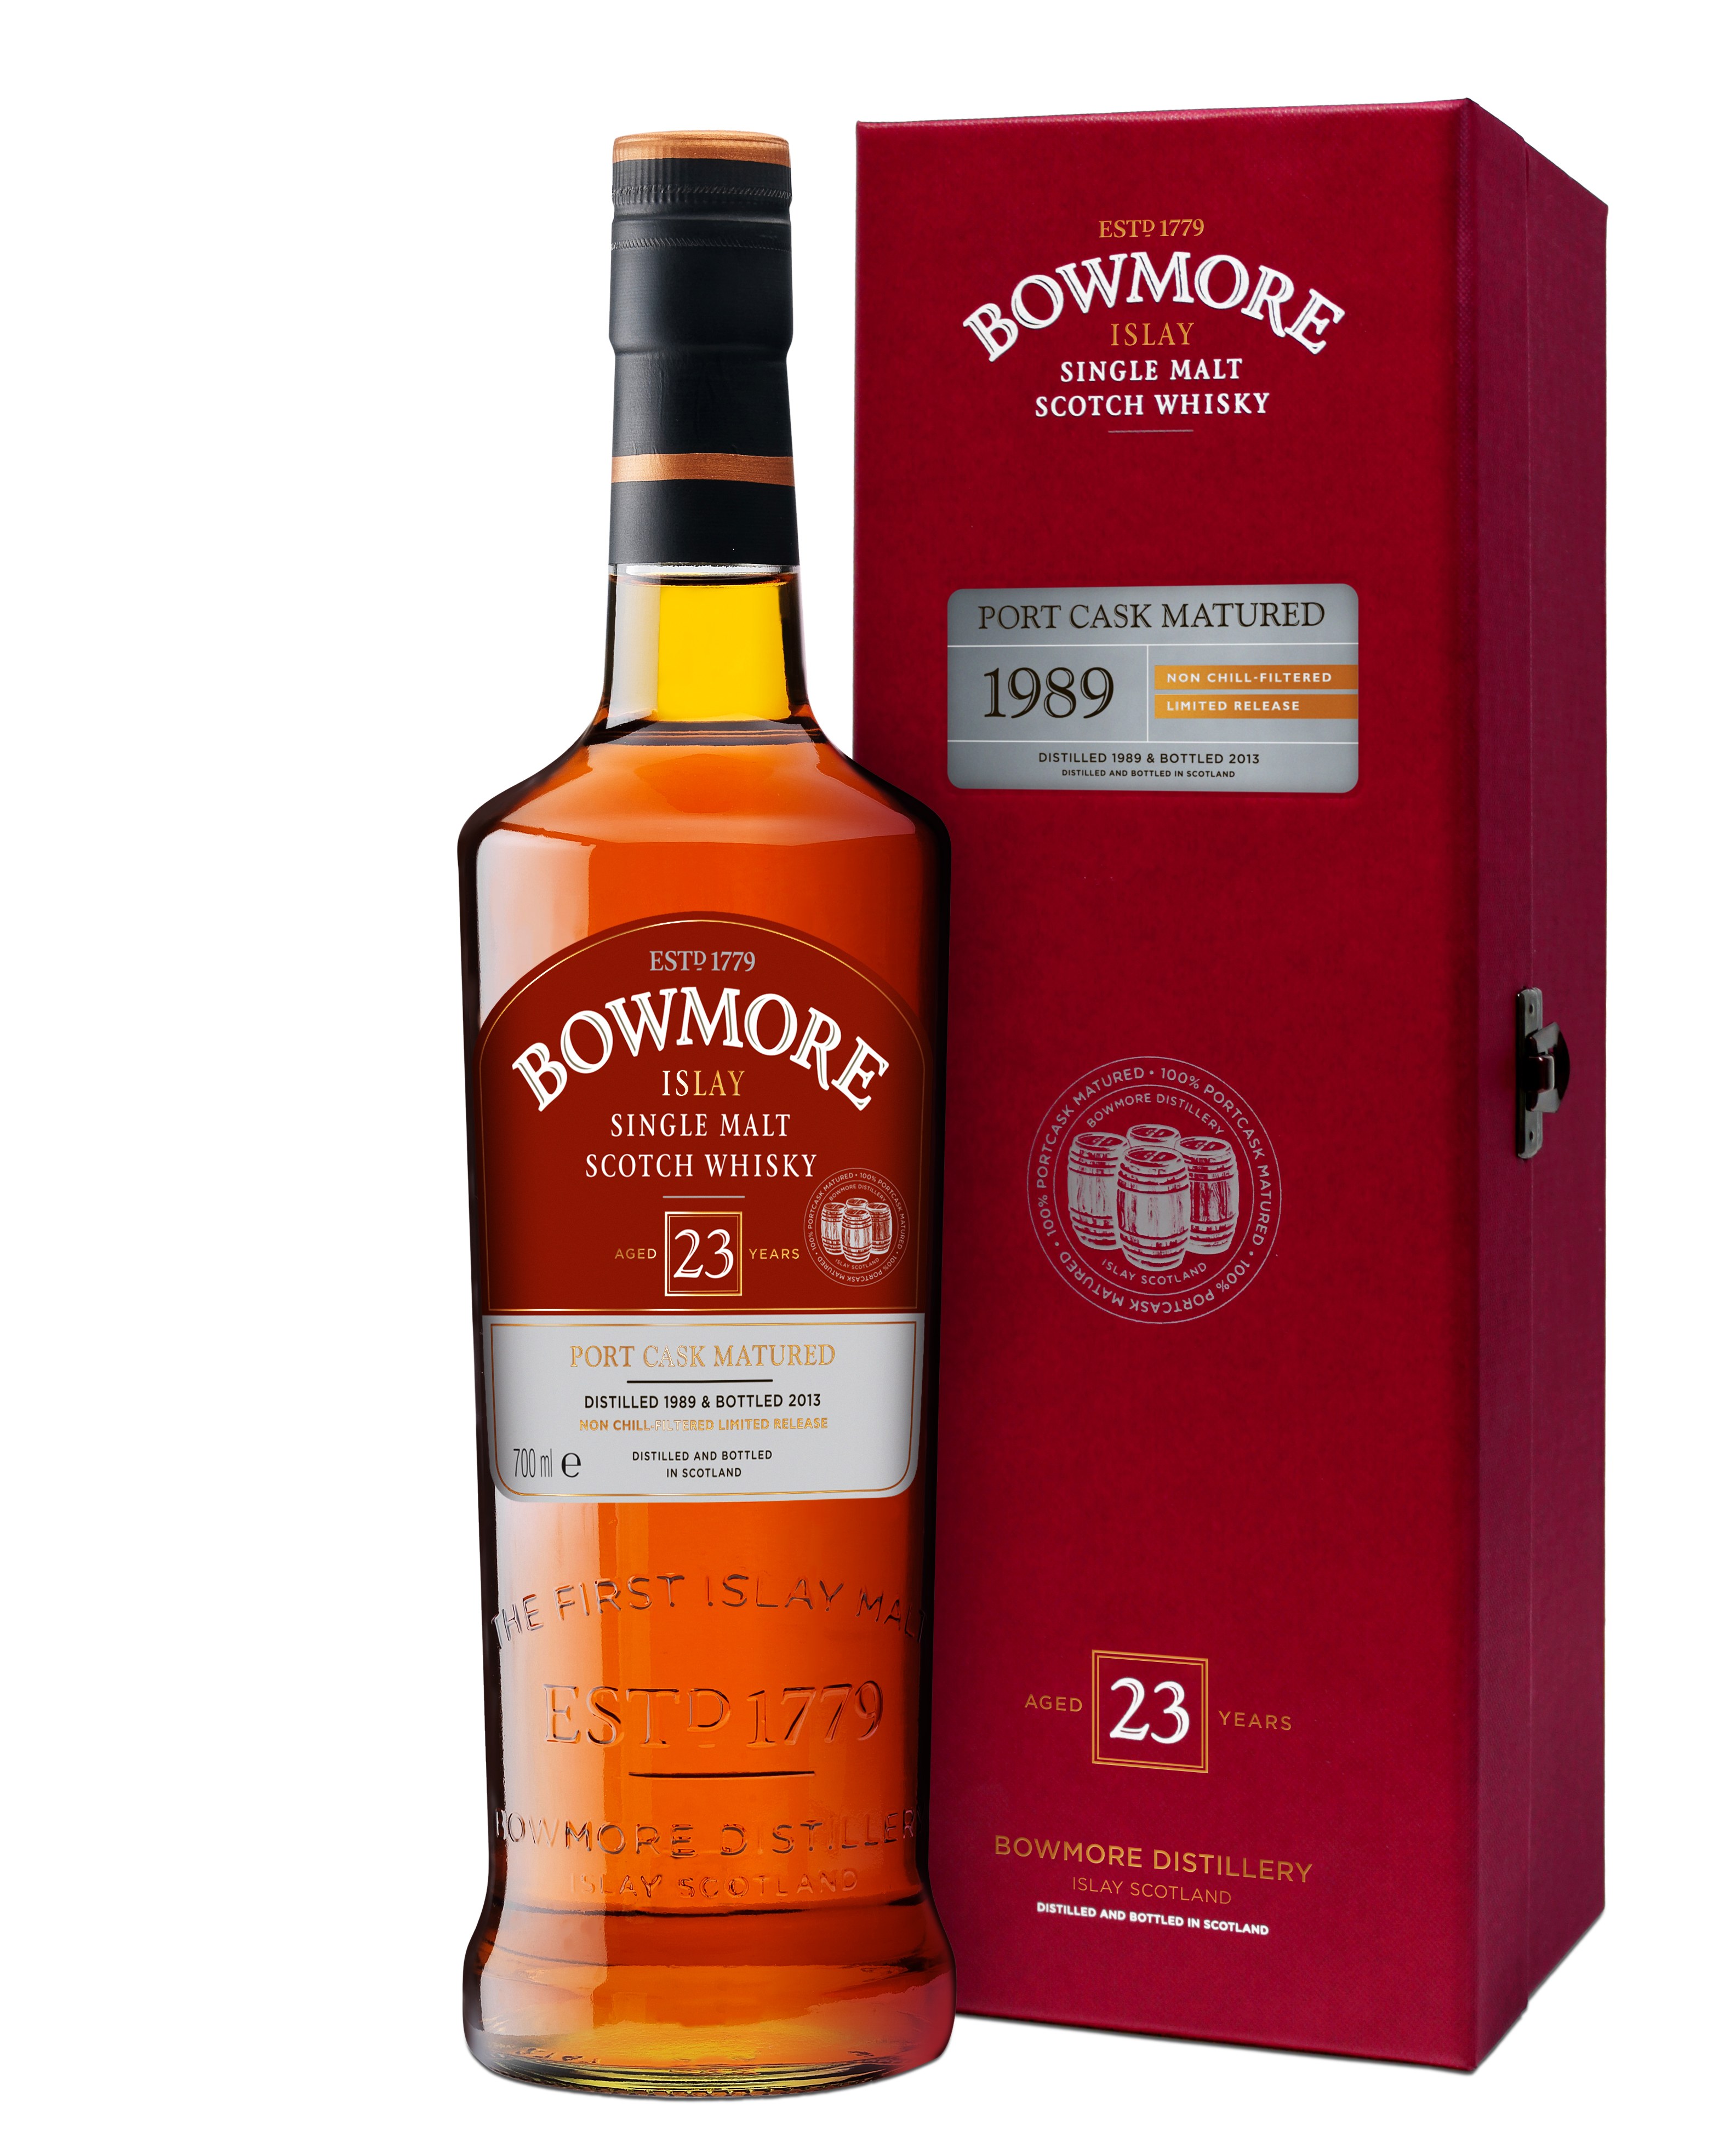 Bowmore Port Matured 23 year old bottle and red box